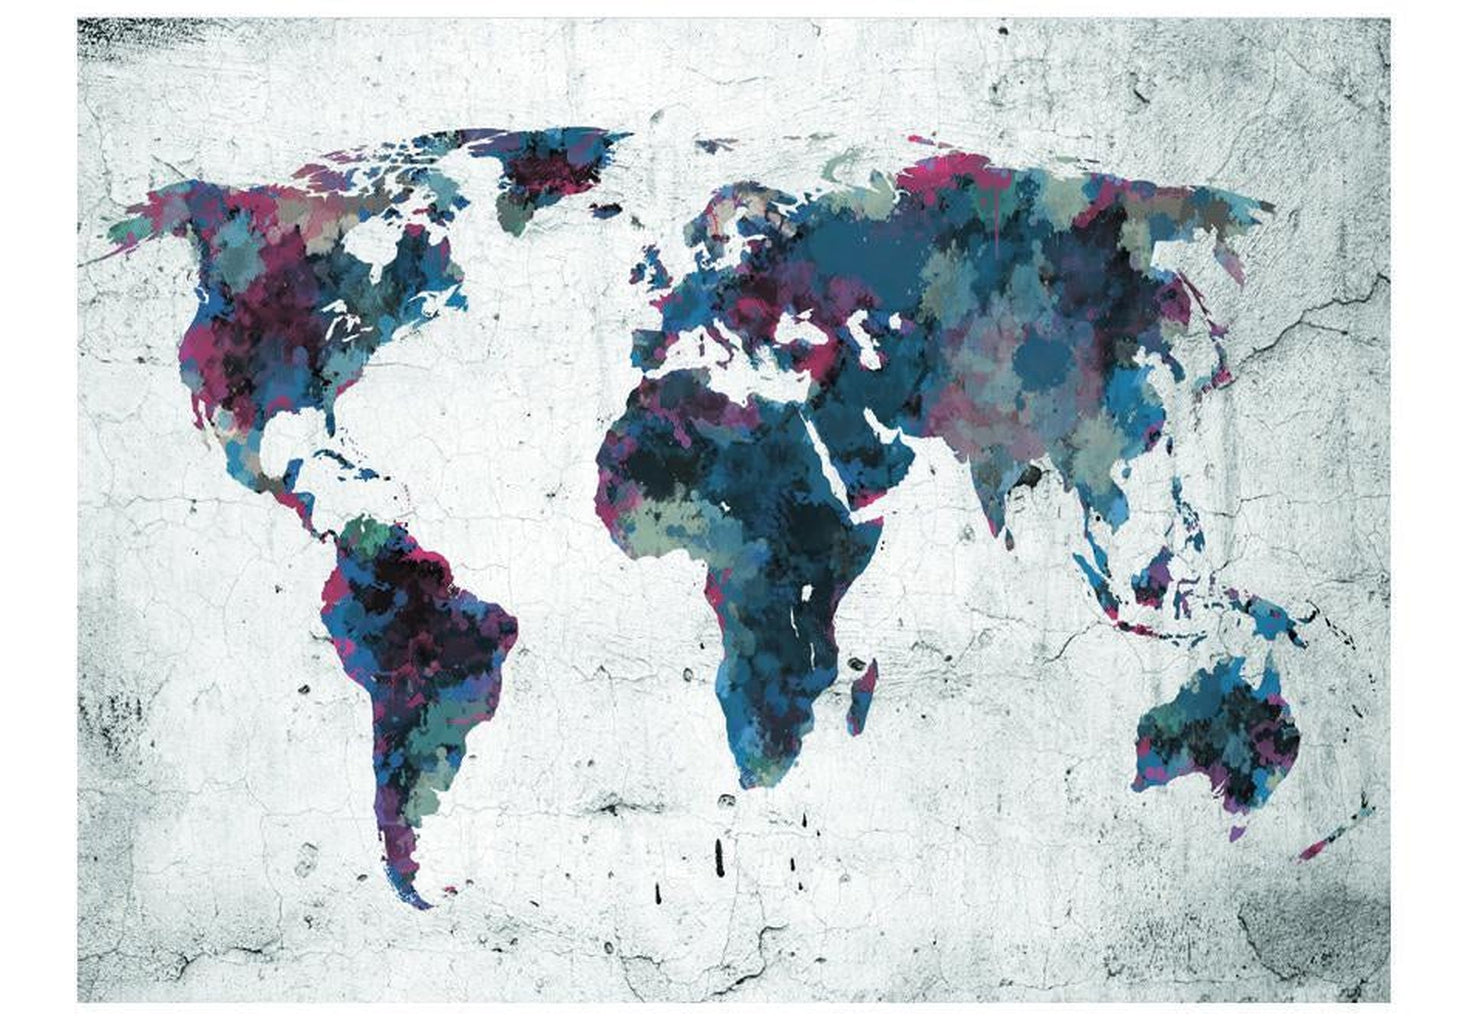 Wall mural - World map on the wall-TipTopHomeDecor